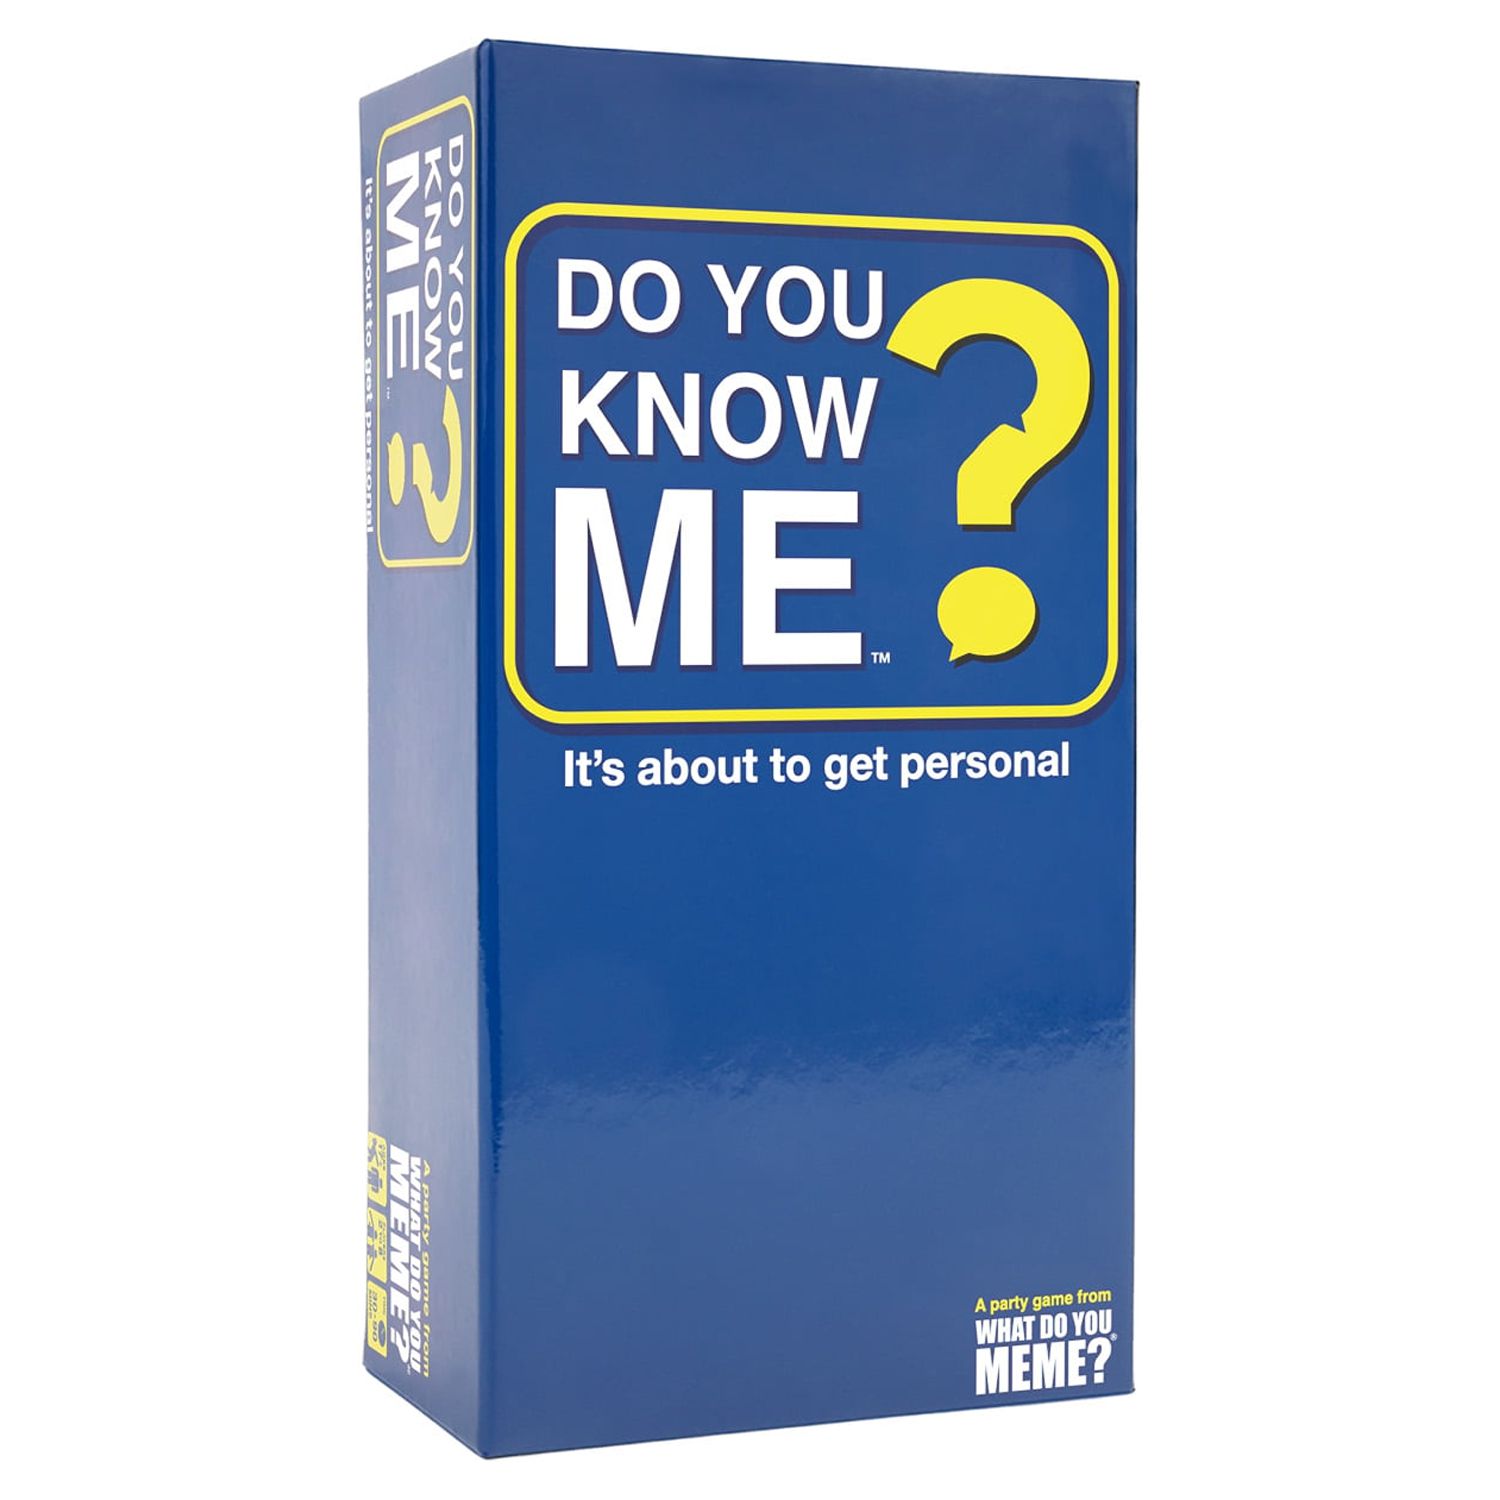 Do You Know Me? the Card Game that Puts You and Your Friends in the Hot Seat by What Do You Meme? - image 1 of 10